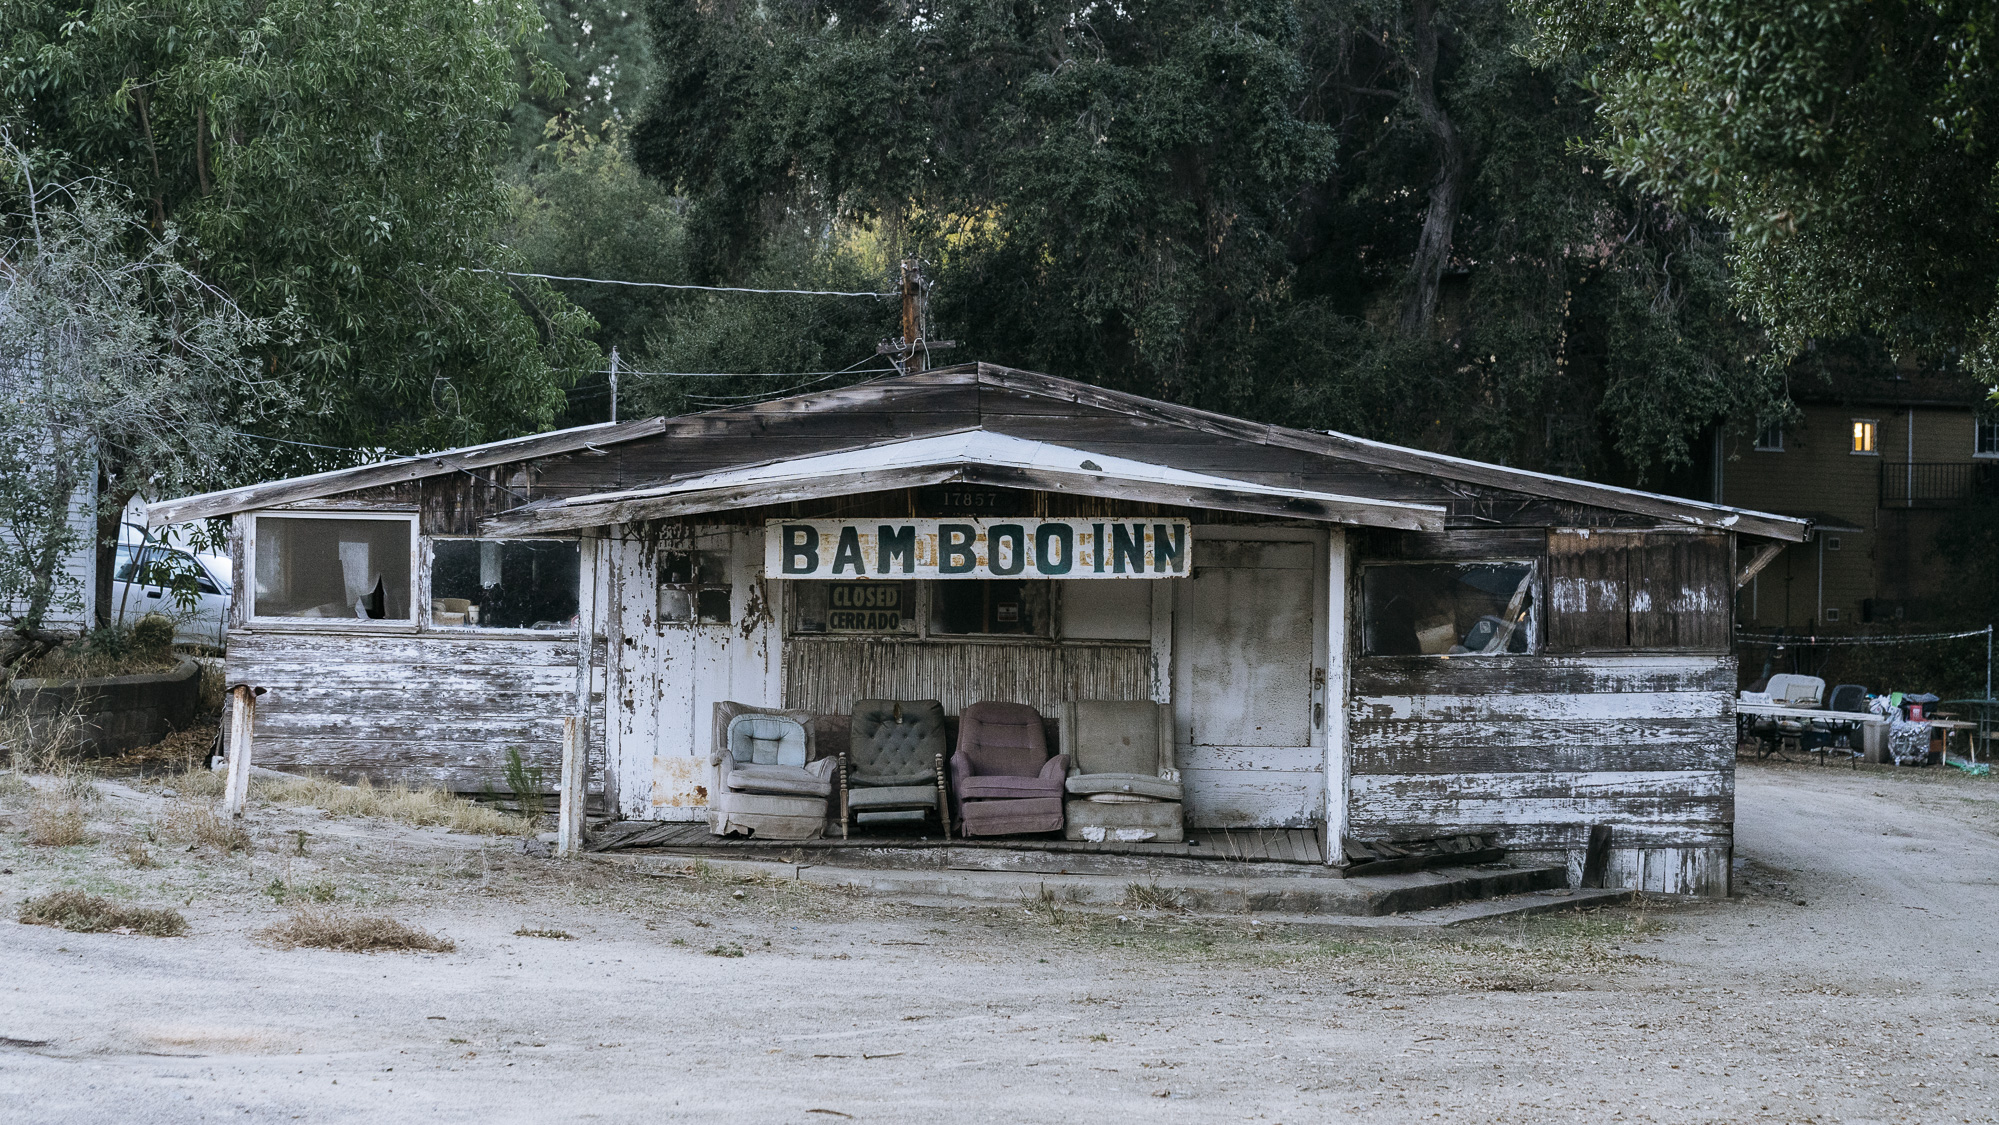  IMAGE CAPTION:  A shuttered Inn on Campo Road in &nbsp;Dulzura, California. 7 miles from the border wall. 